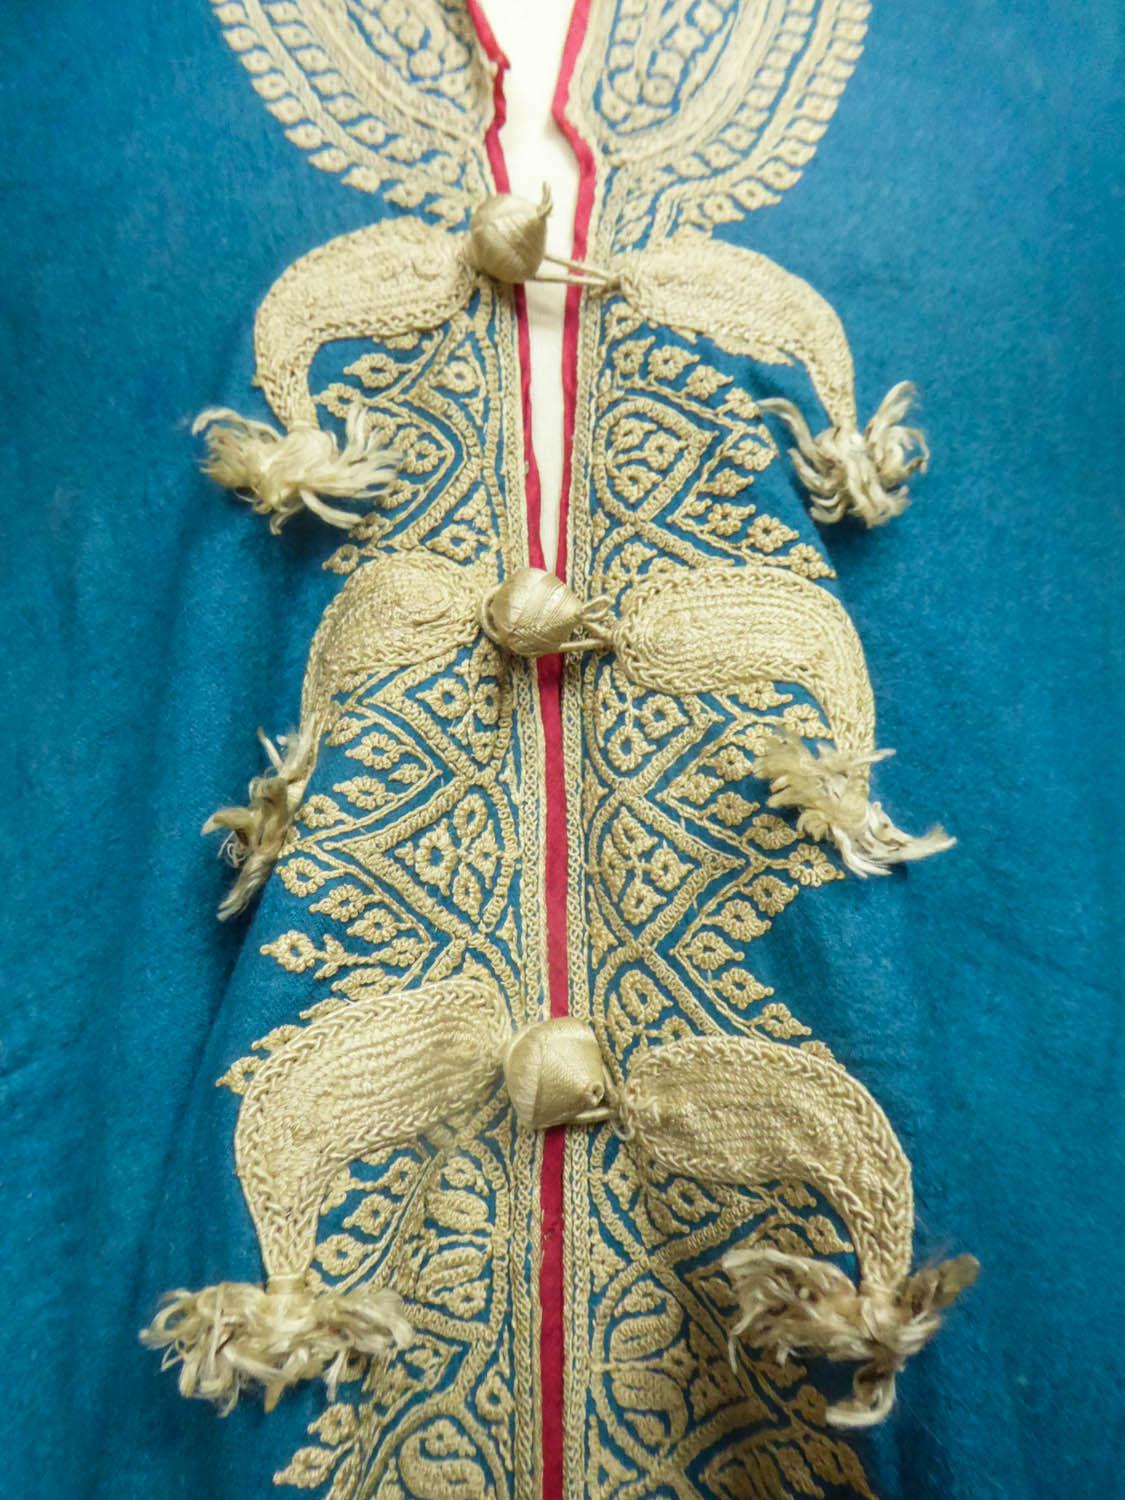 Dignitary coat or Choga - Indes Punjab 19th century 1